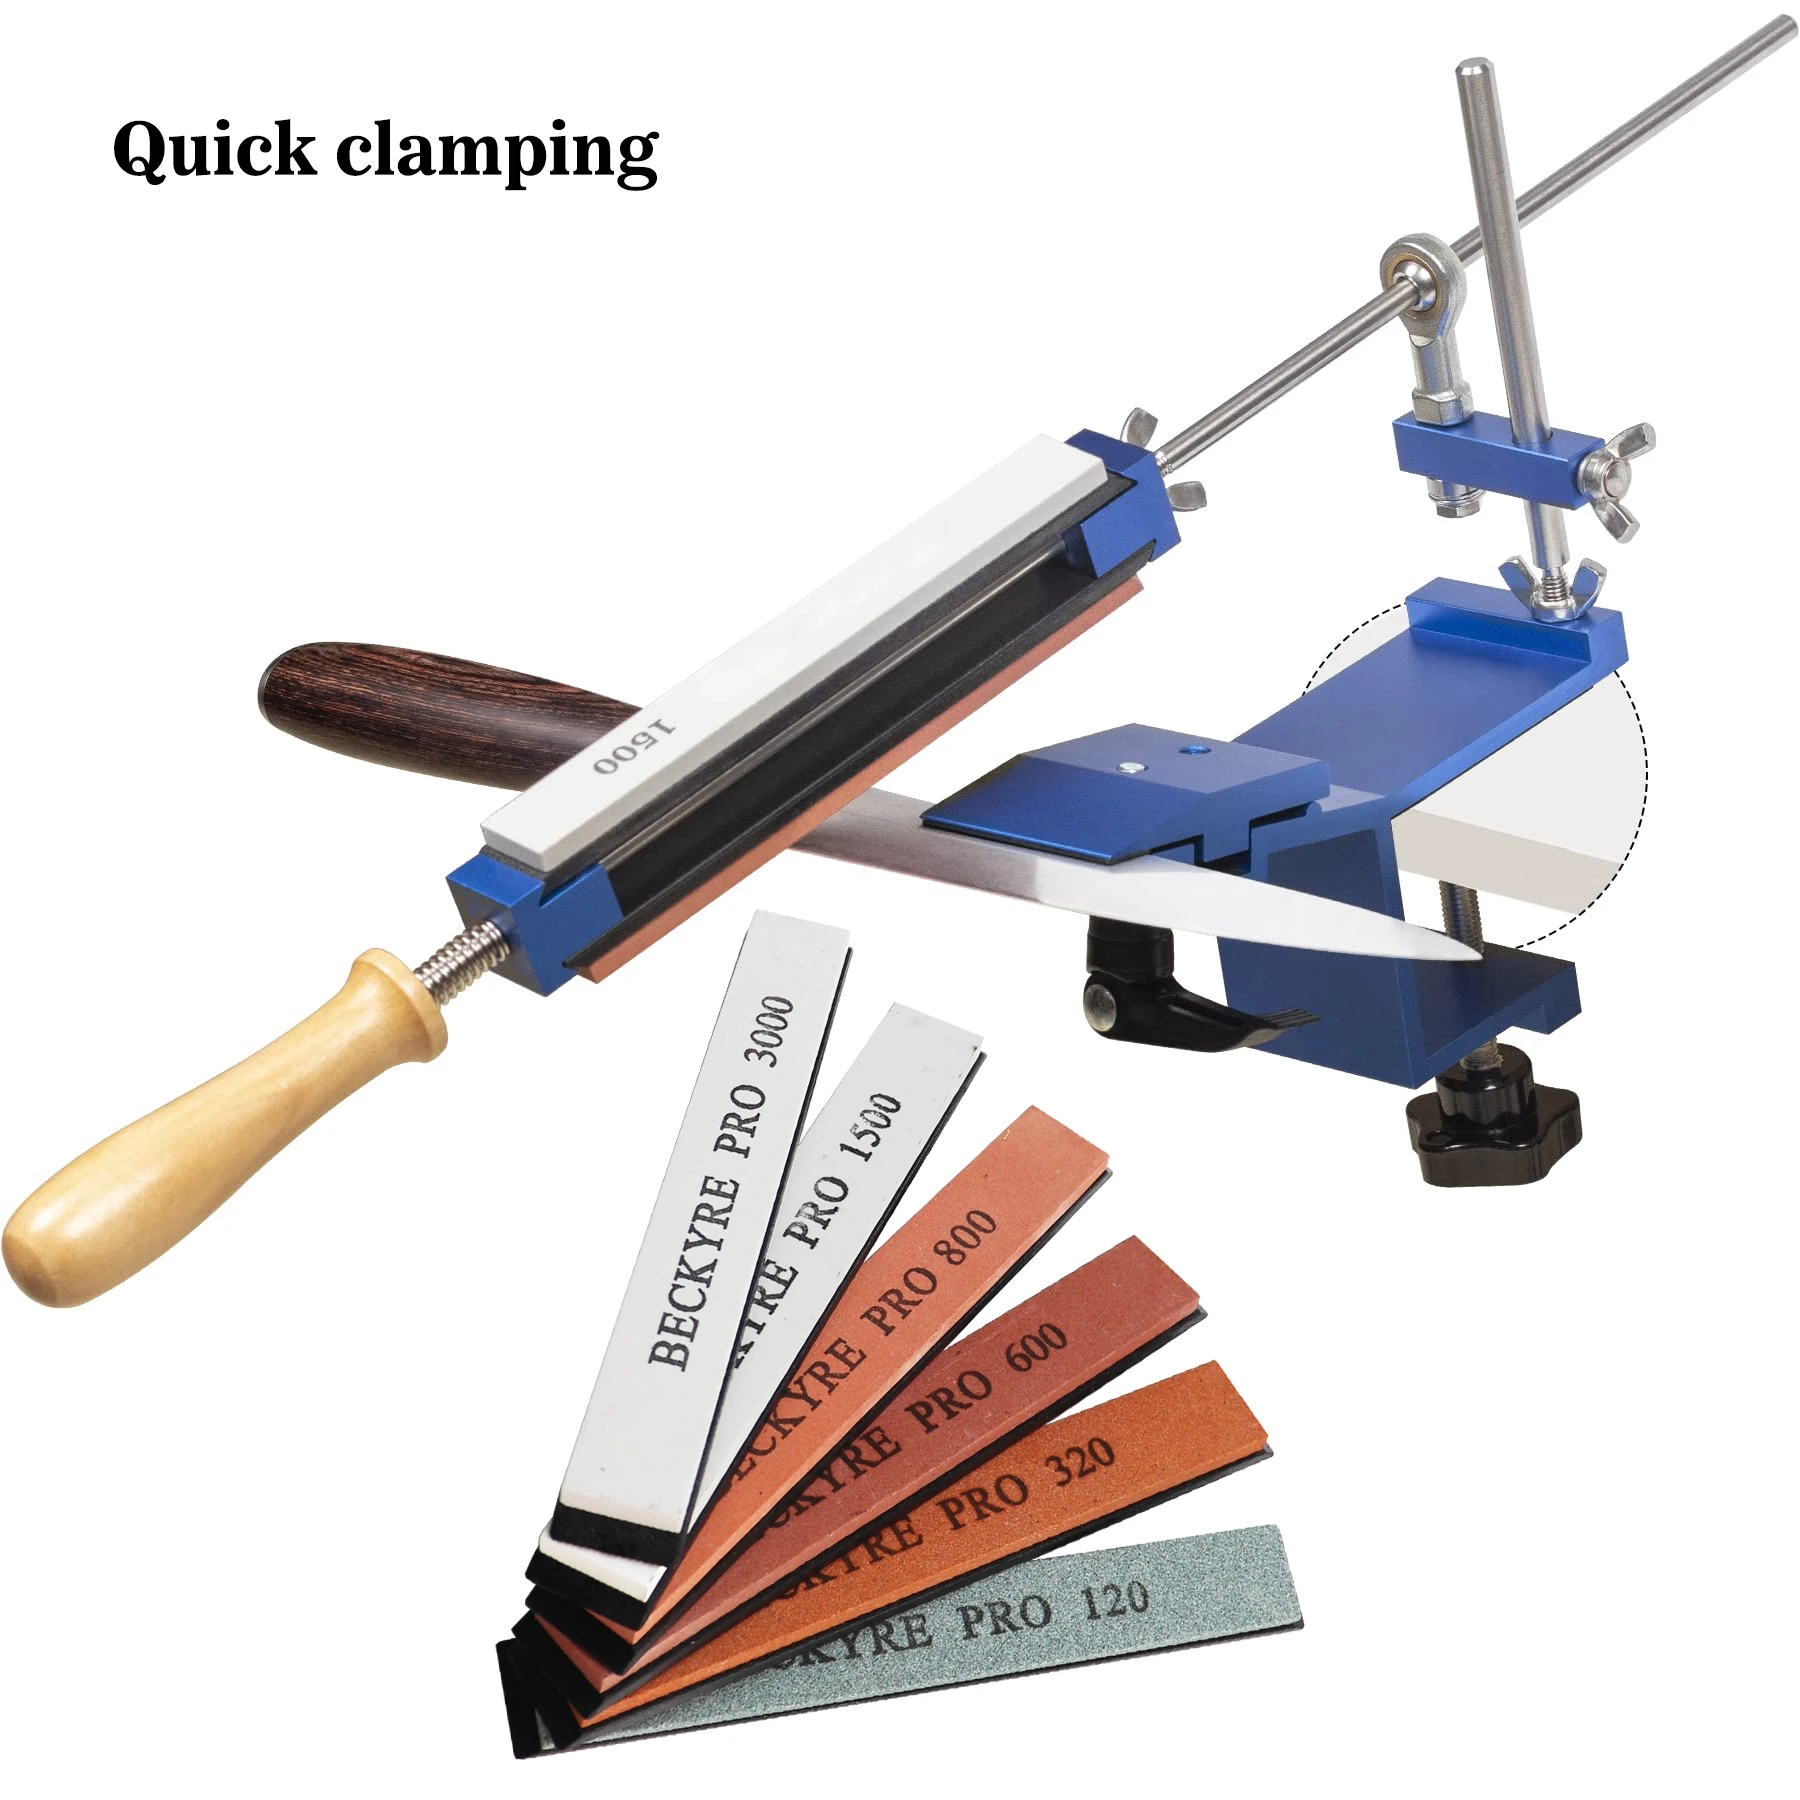 Cutter Sharpener Sharpening System Tools Fix-angle Whetstone Grinder with Grind Stones